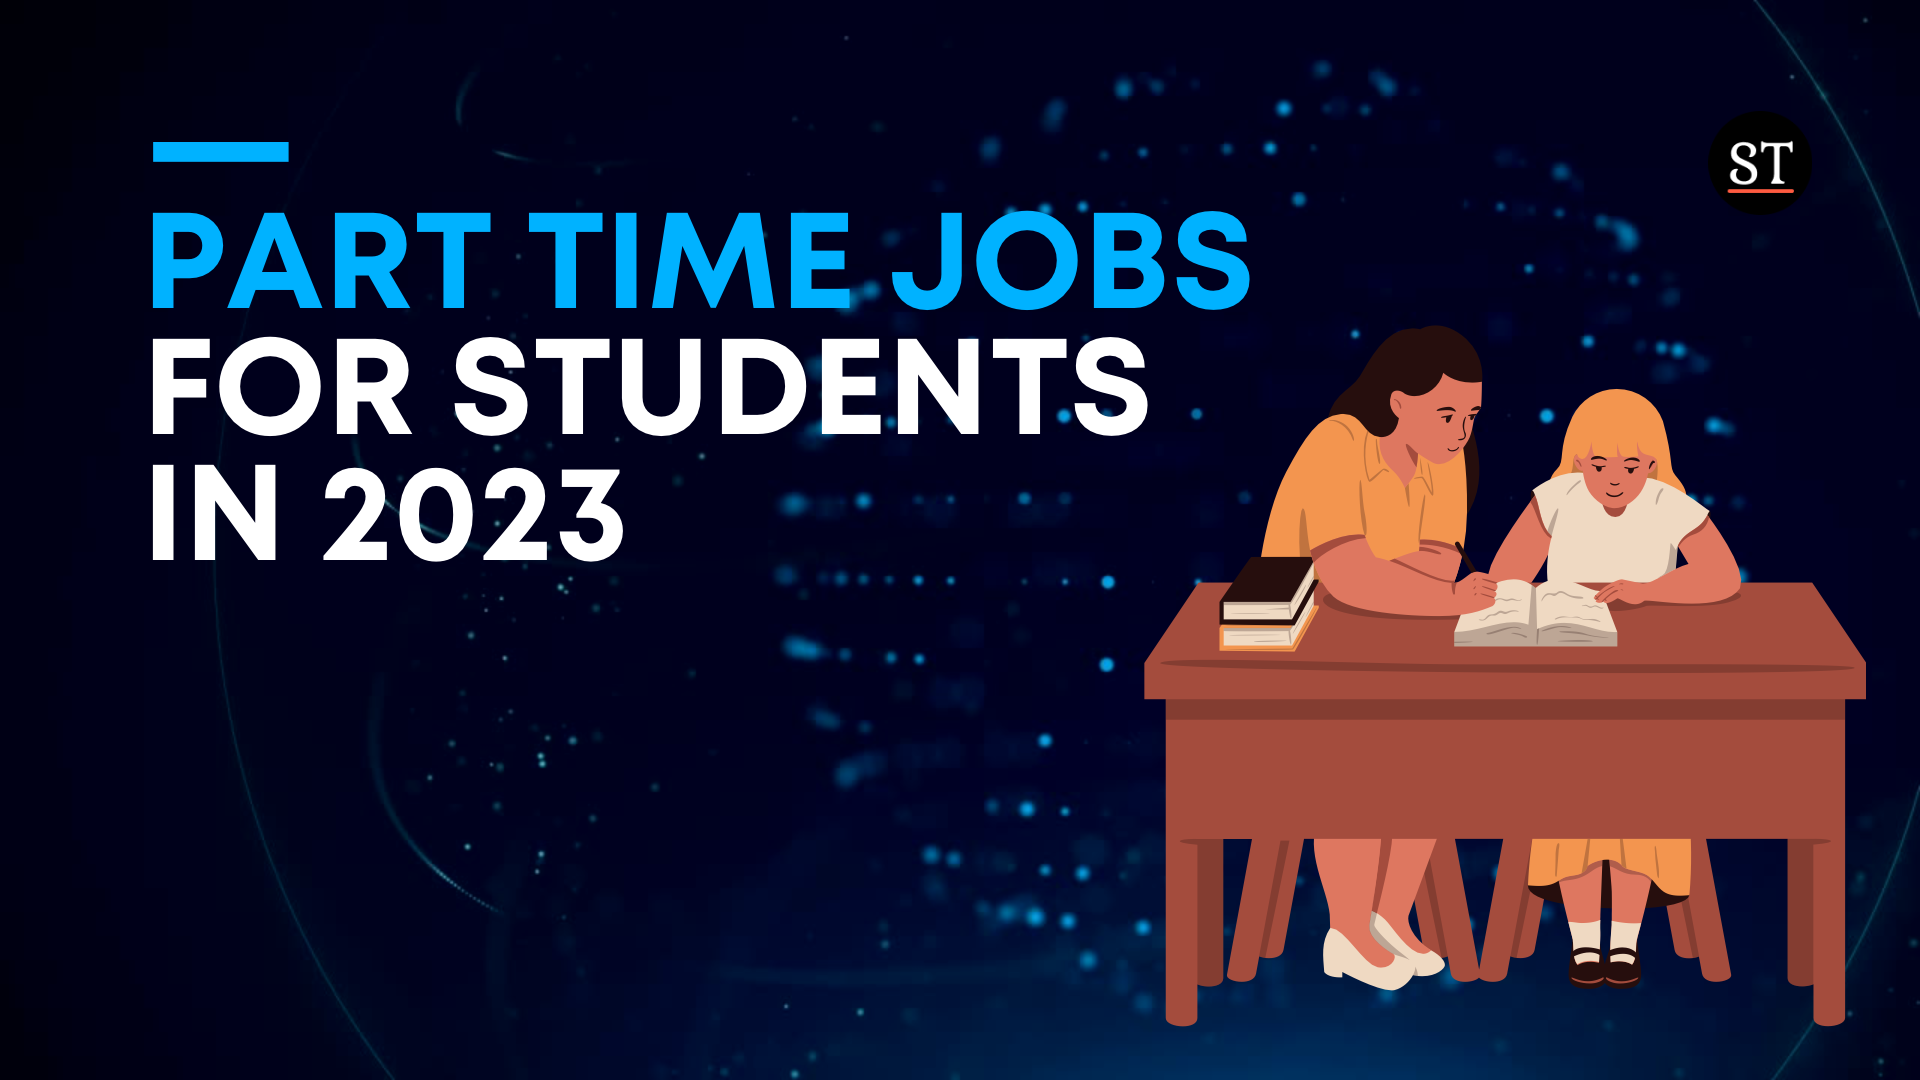 Online jobs for students to earn money at home in 2023